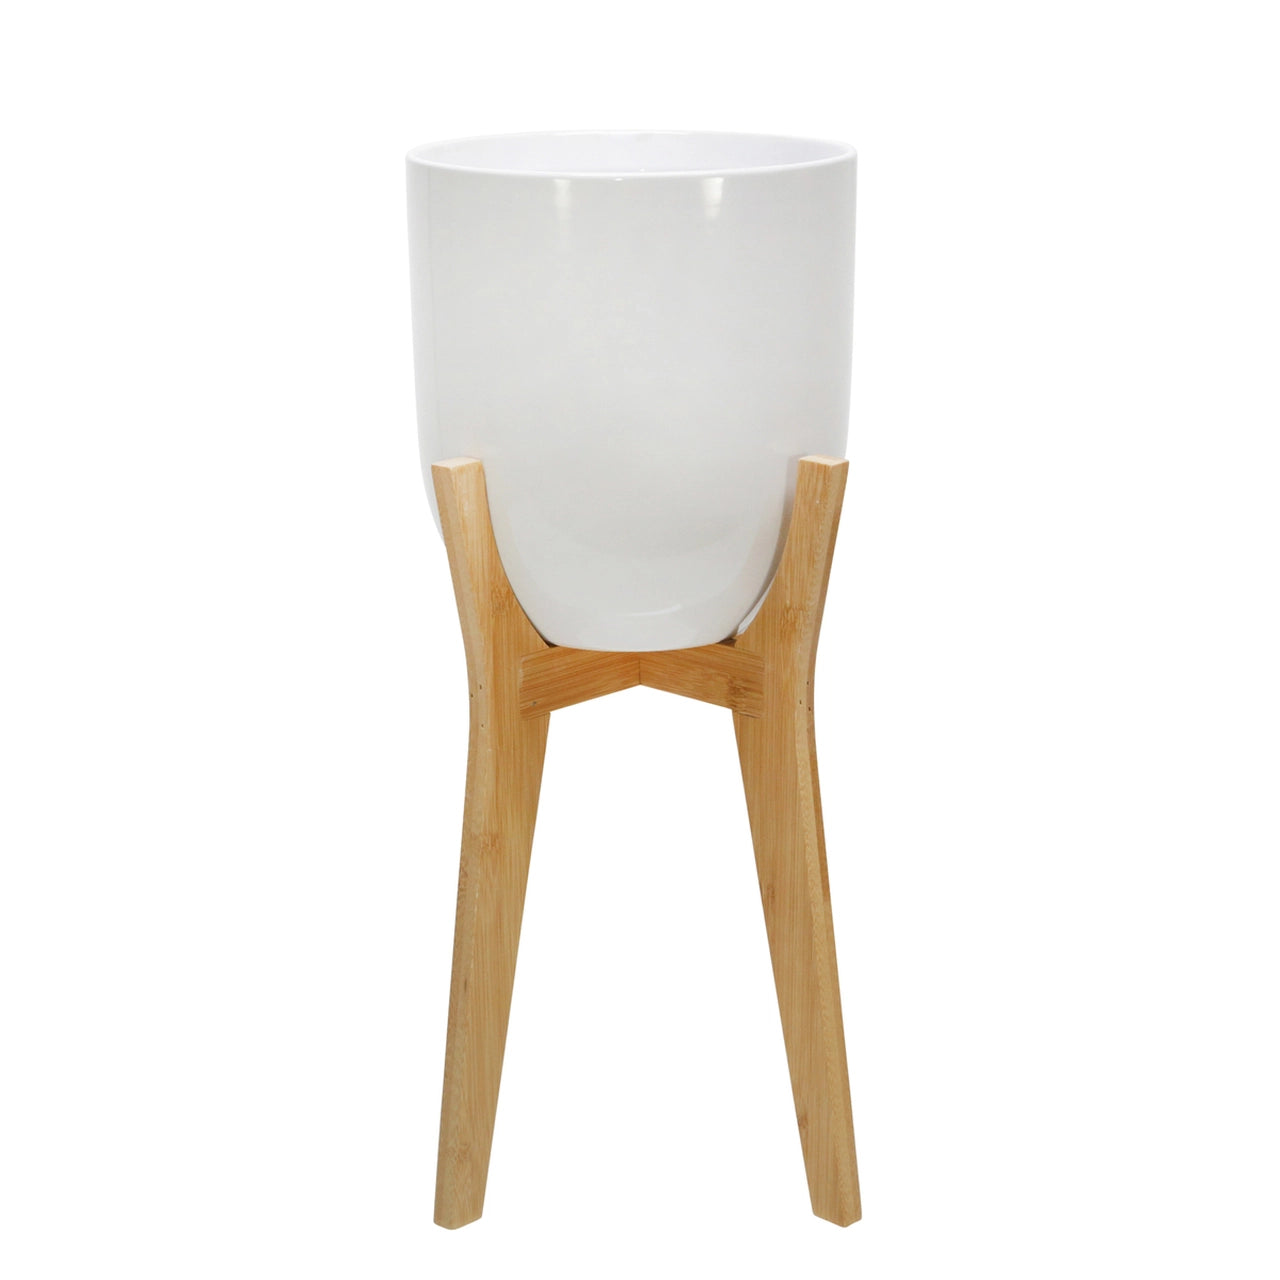 White Planter With Wooden Stand